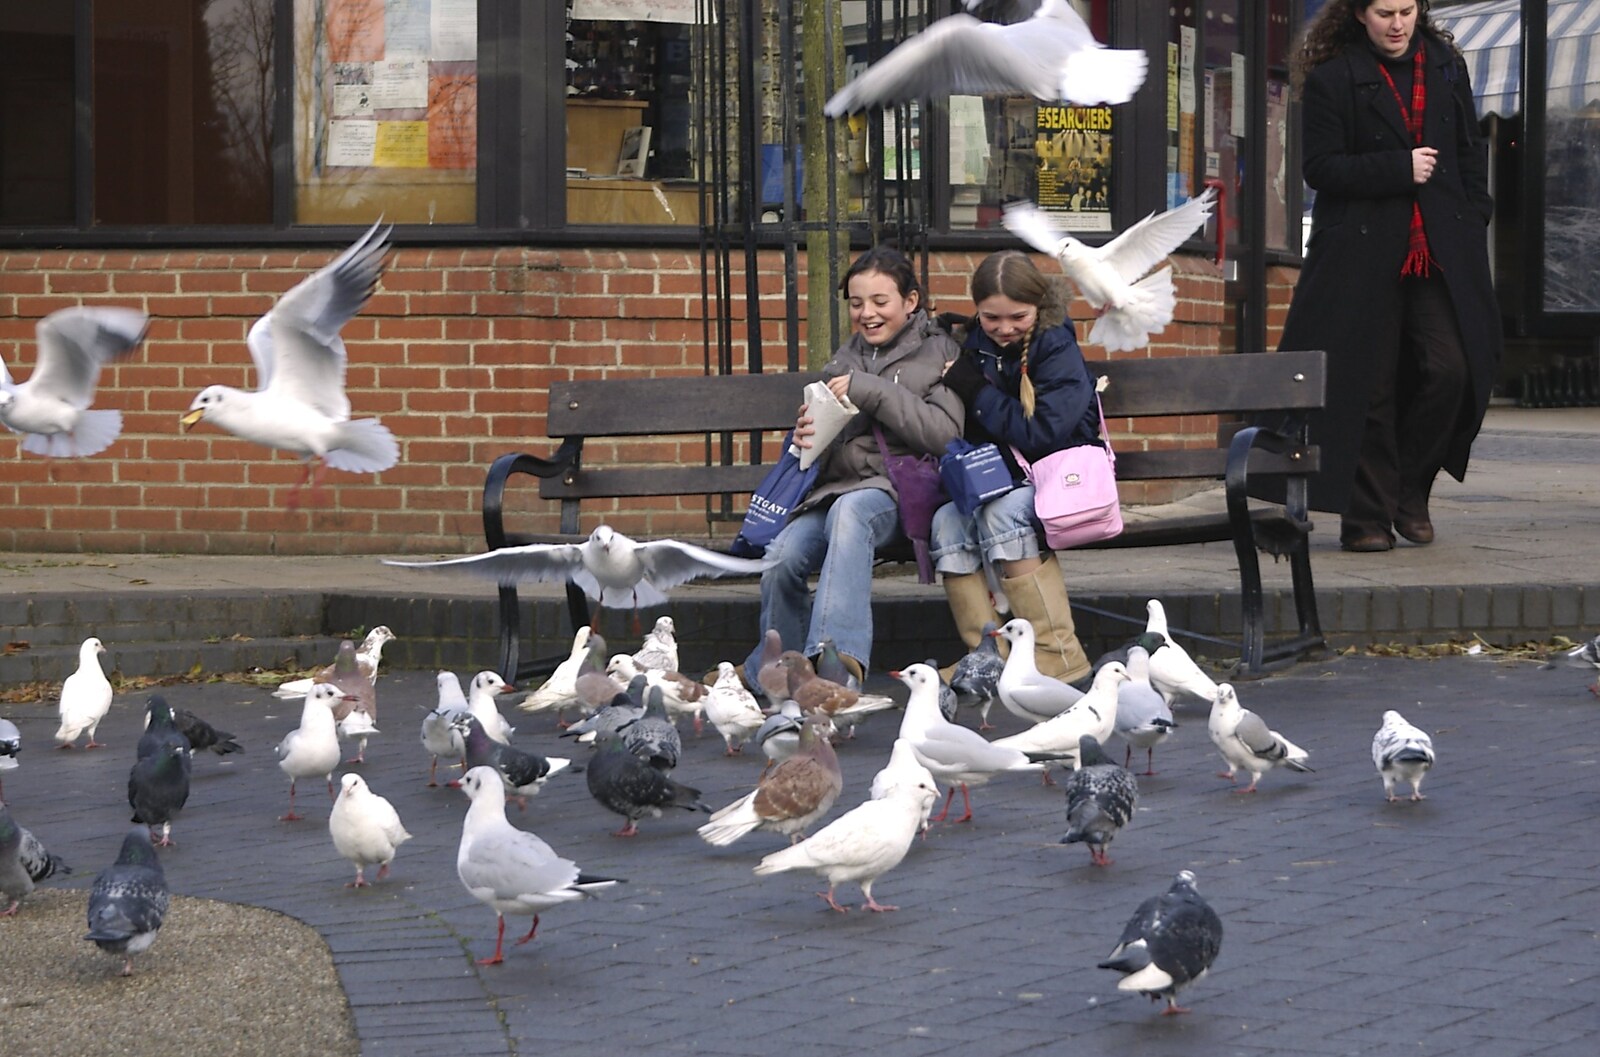 Chip-eating girls are mobbed by birds from Random Scenes of Diss, Norfolk - 20th November 2004